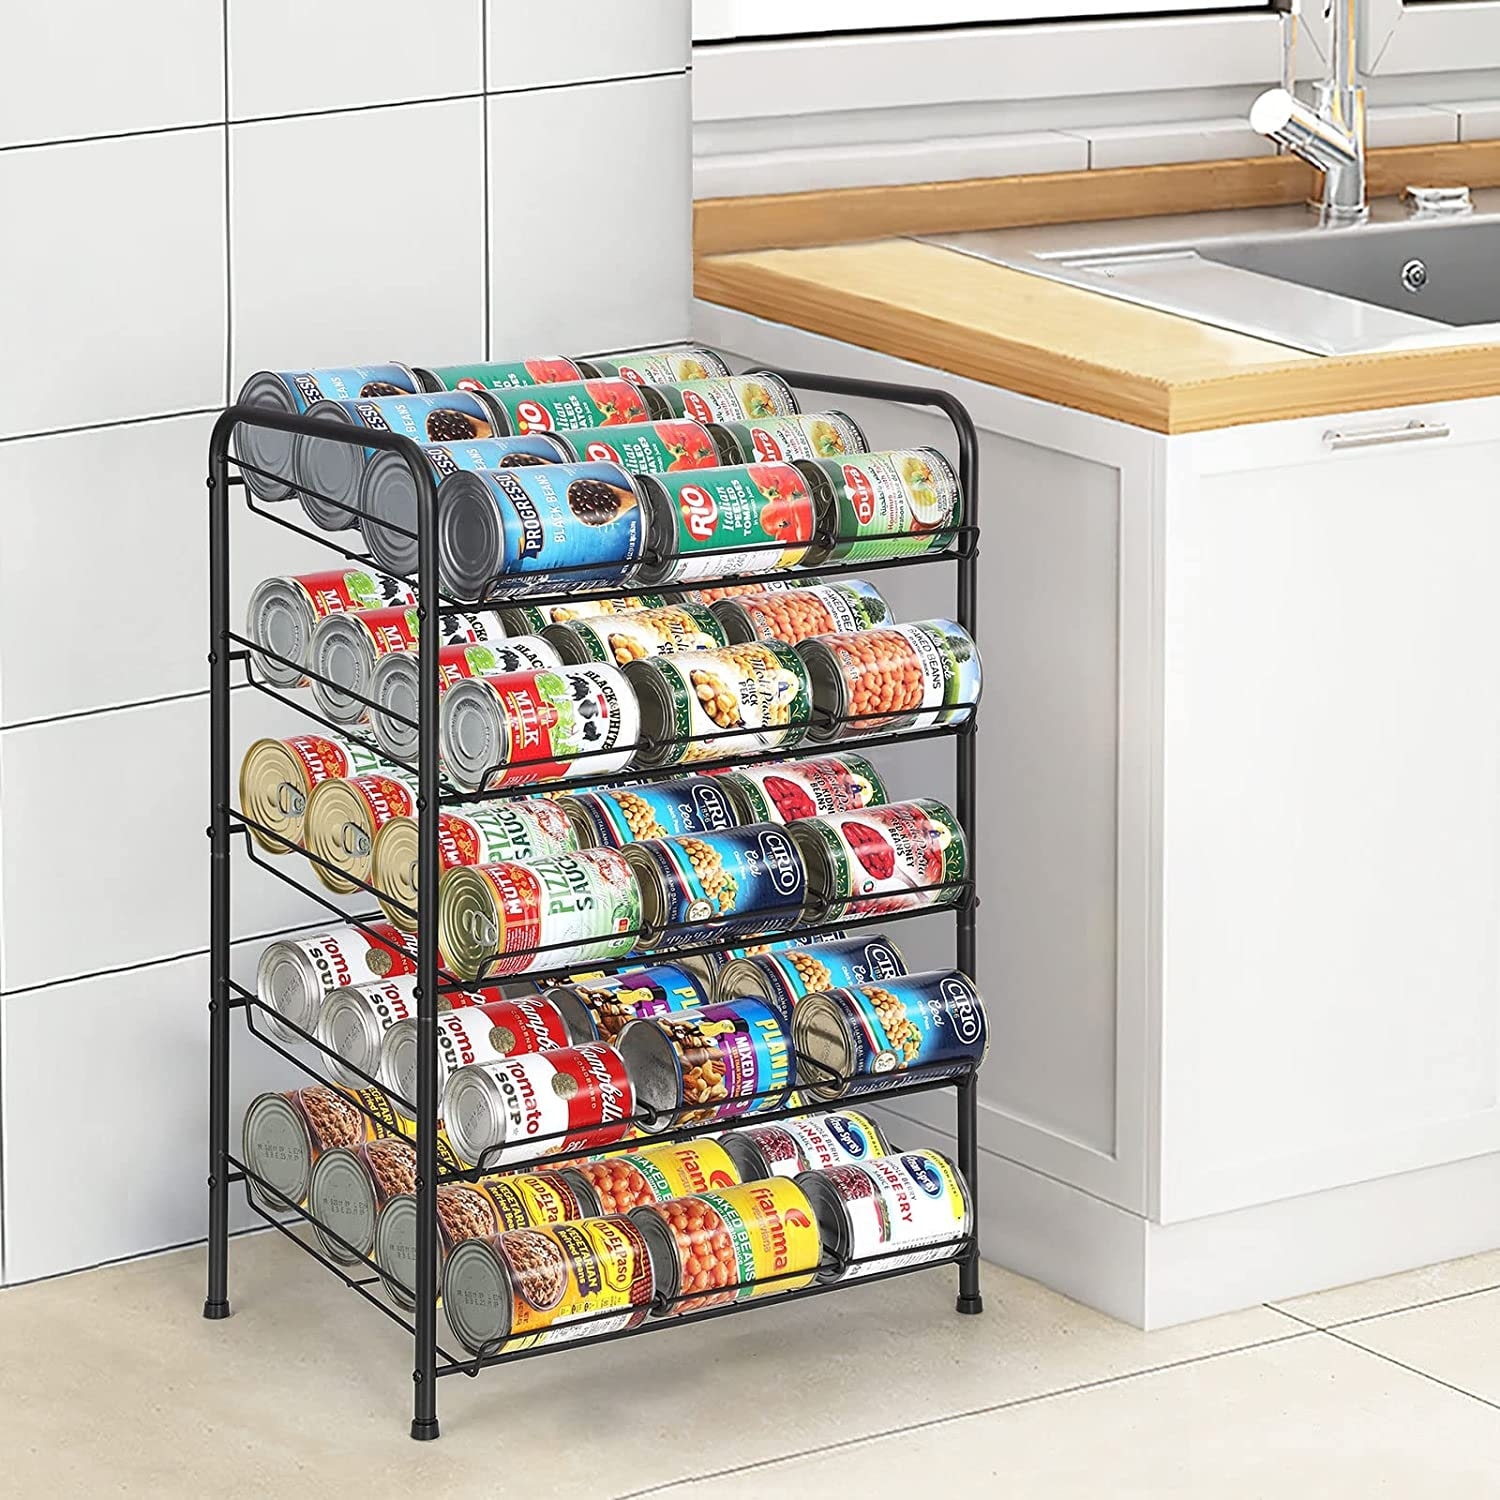 https://ak1.ostkcdn.com/images/products/is/images/direct/9bb37707a039b215844dbd8fac87188a24dfae59/Can-Organizer-Can-Good-Organizer-for-Pantry.jpg